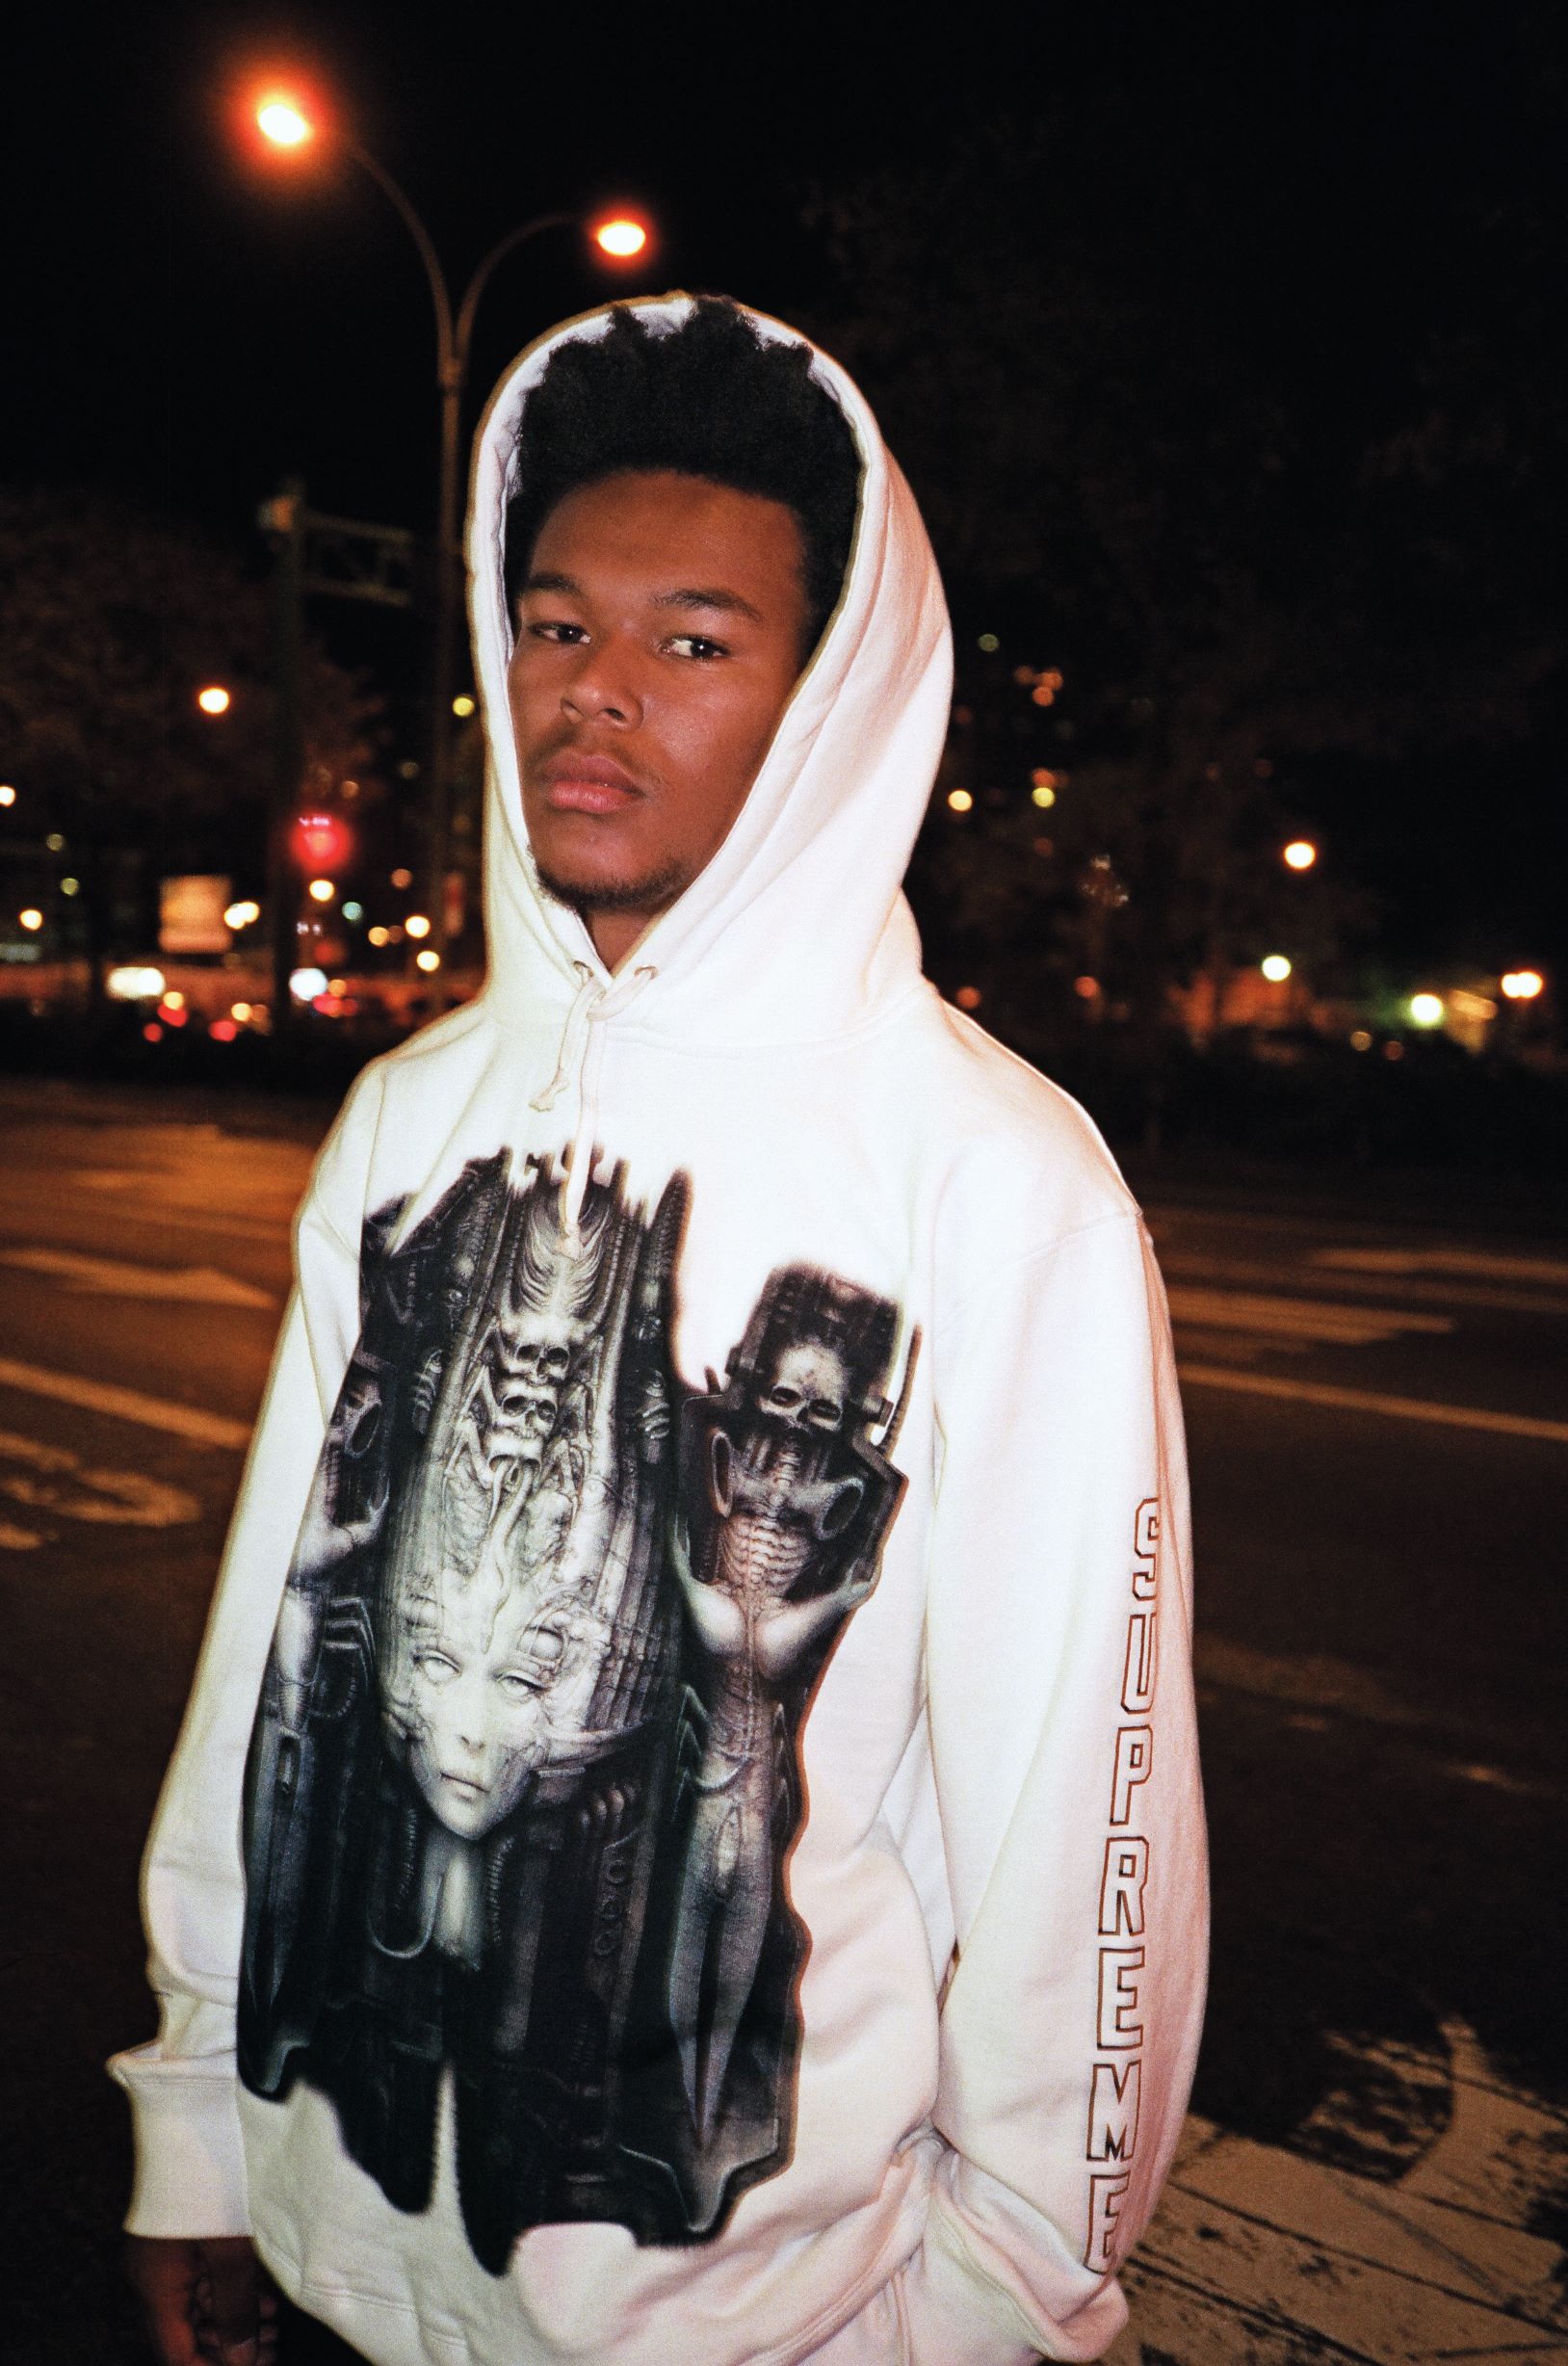 Supreme in 6 Collabs: HR Giger